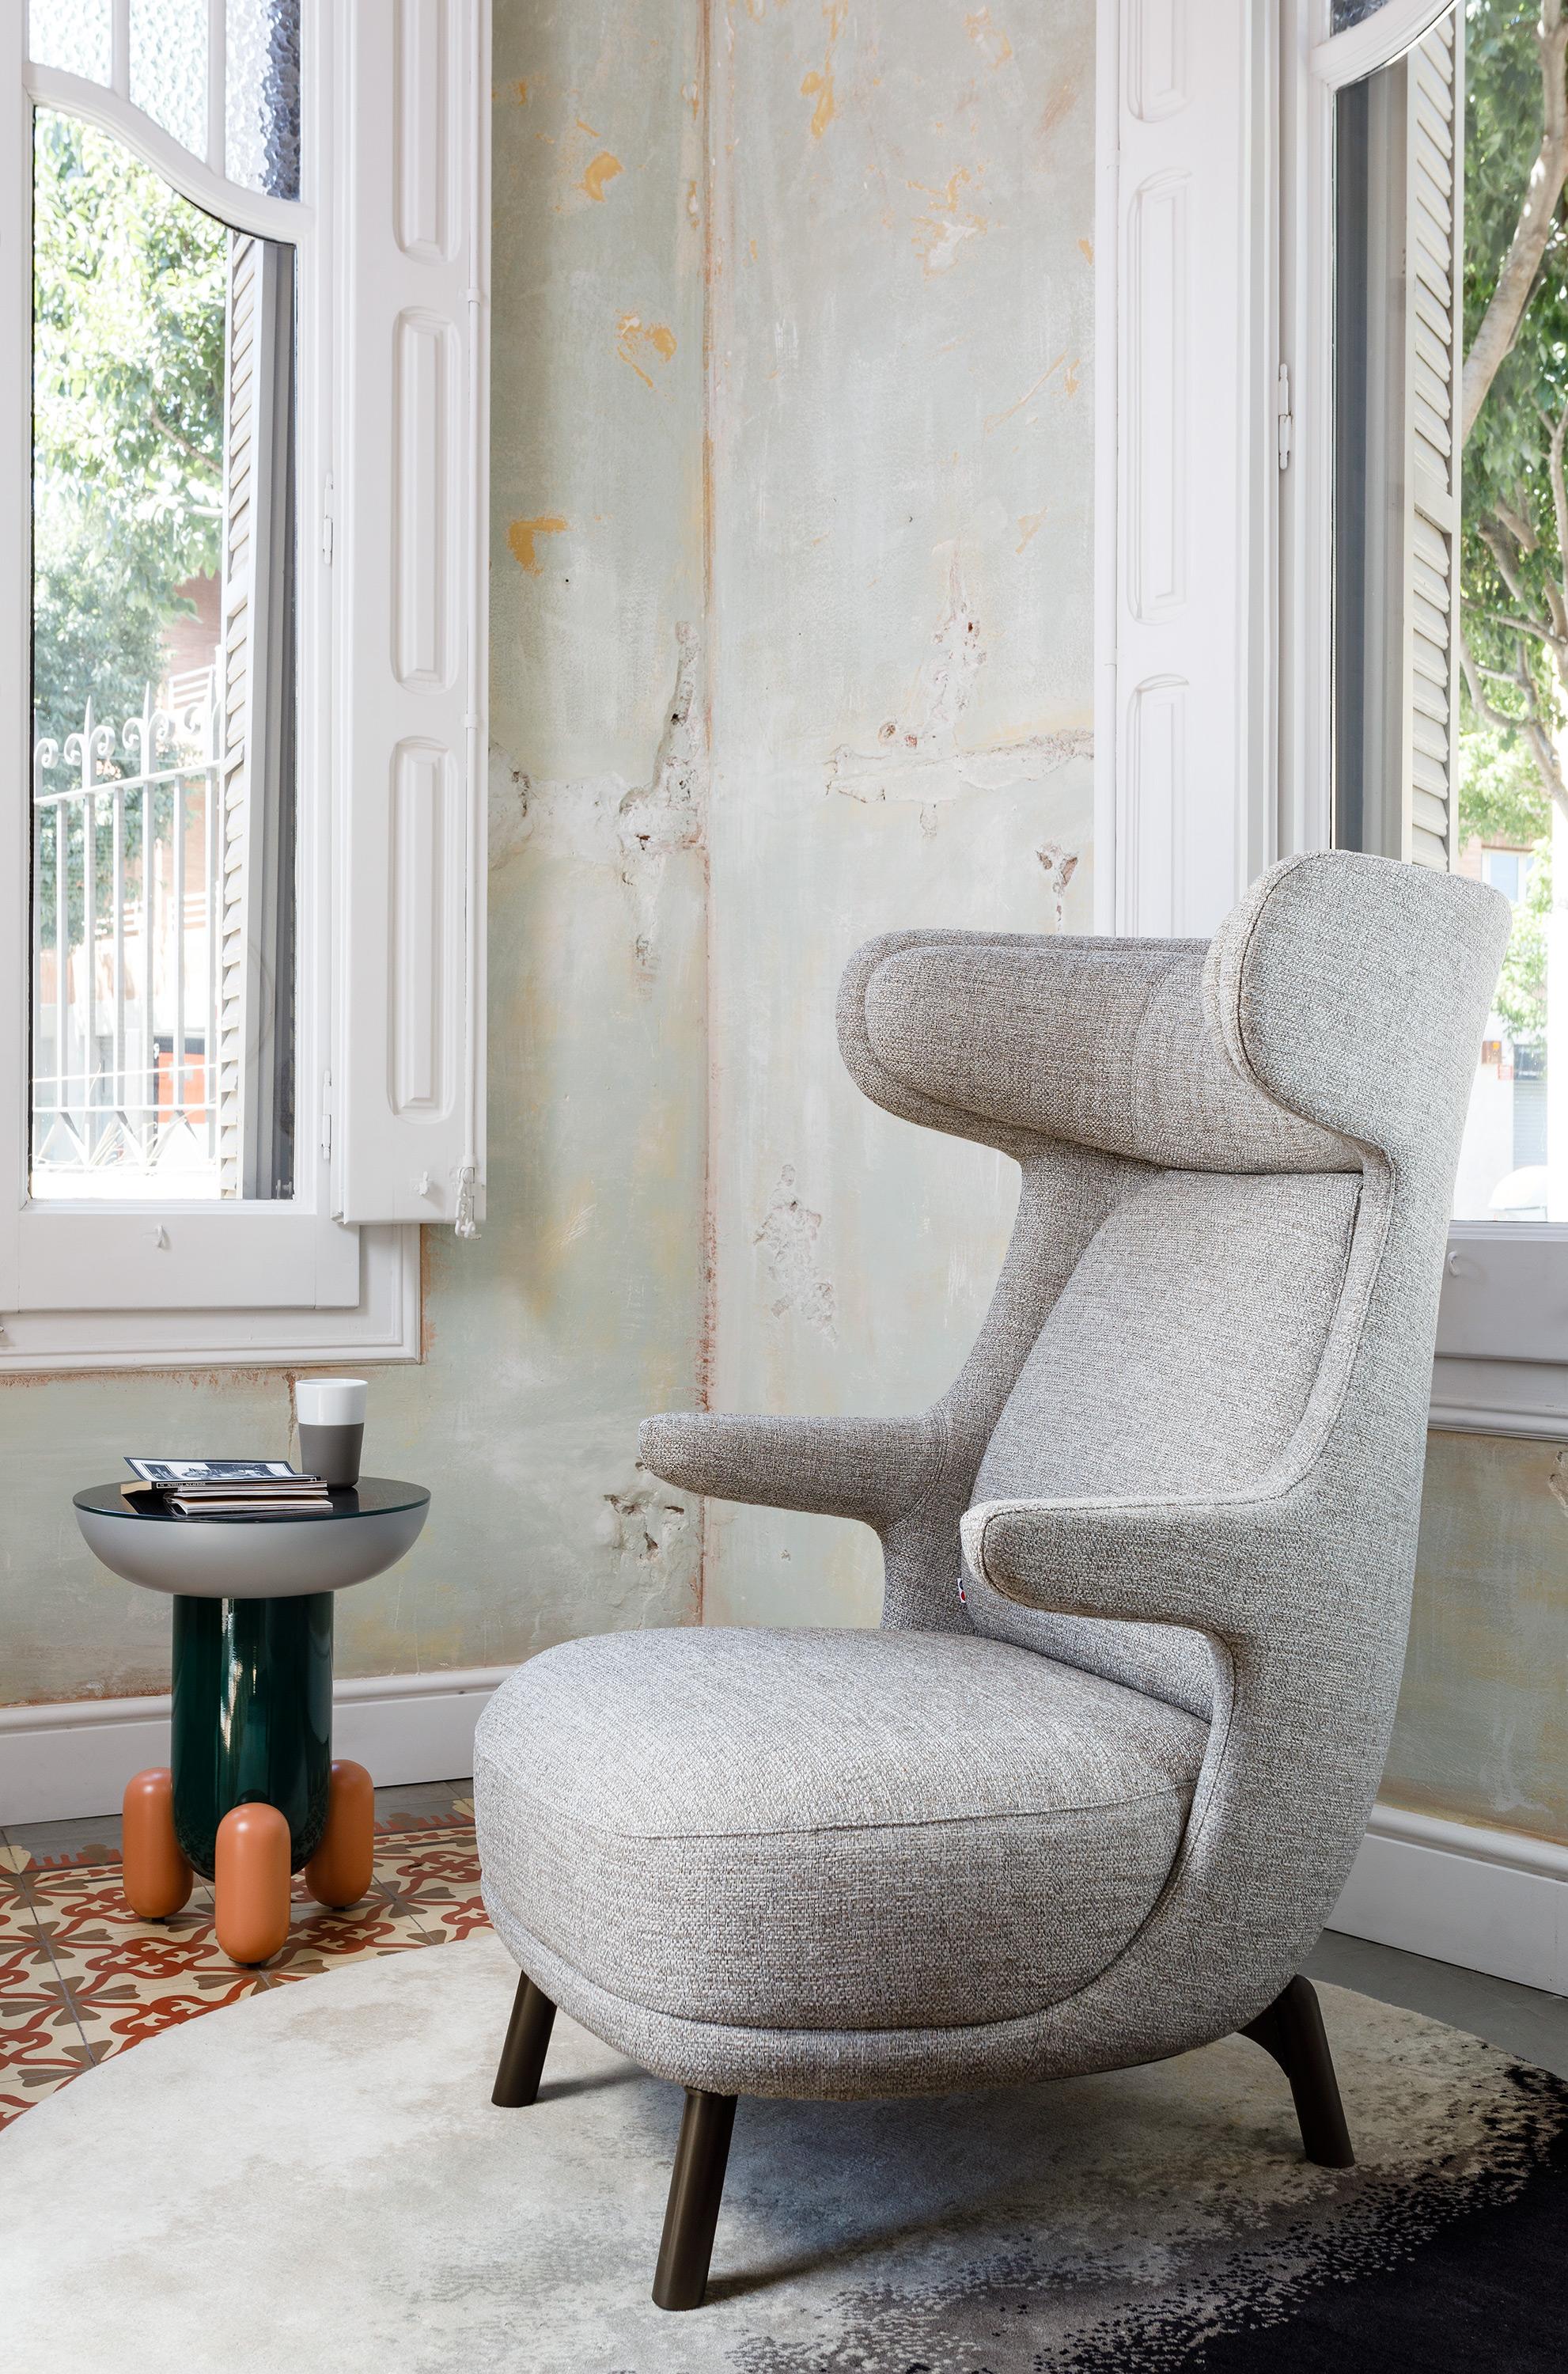 A new armchair by Jaime Hayon which will convert into a classic. As comfortable as possible within certain dimensions that adapt well to the body and space it’s in, for both home and contract. It has sculptural forms and a lovely profile, similar to